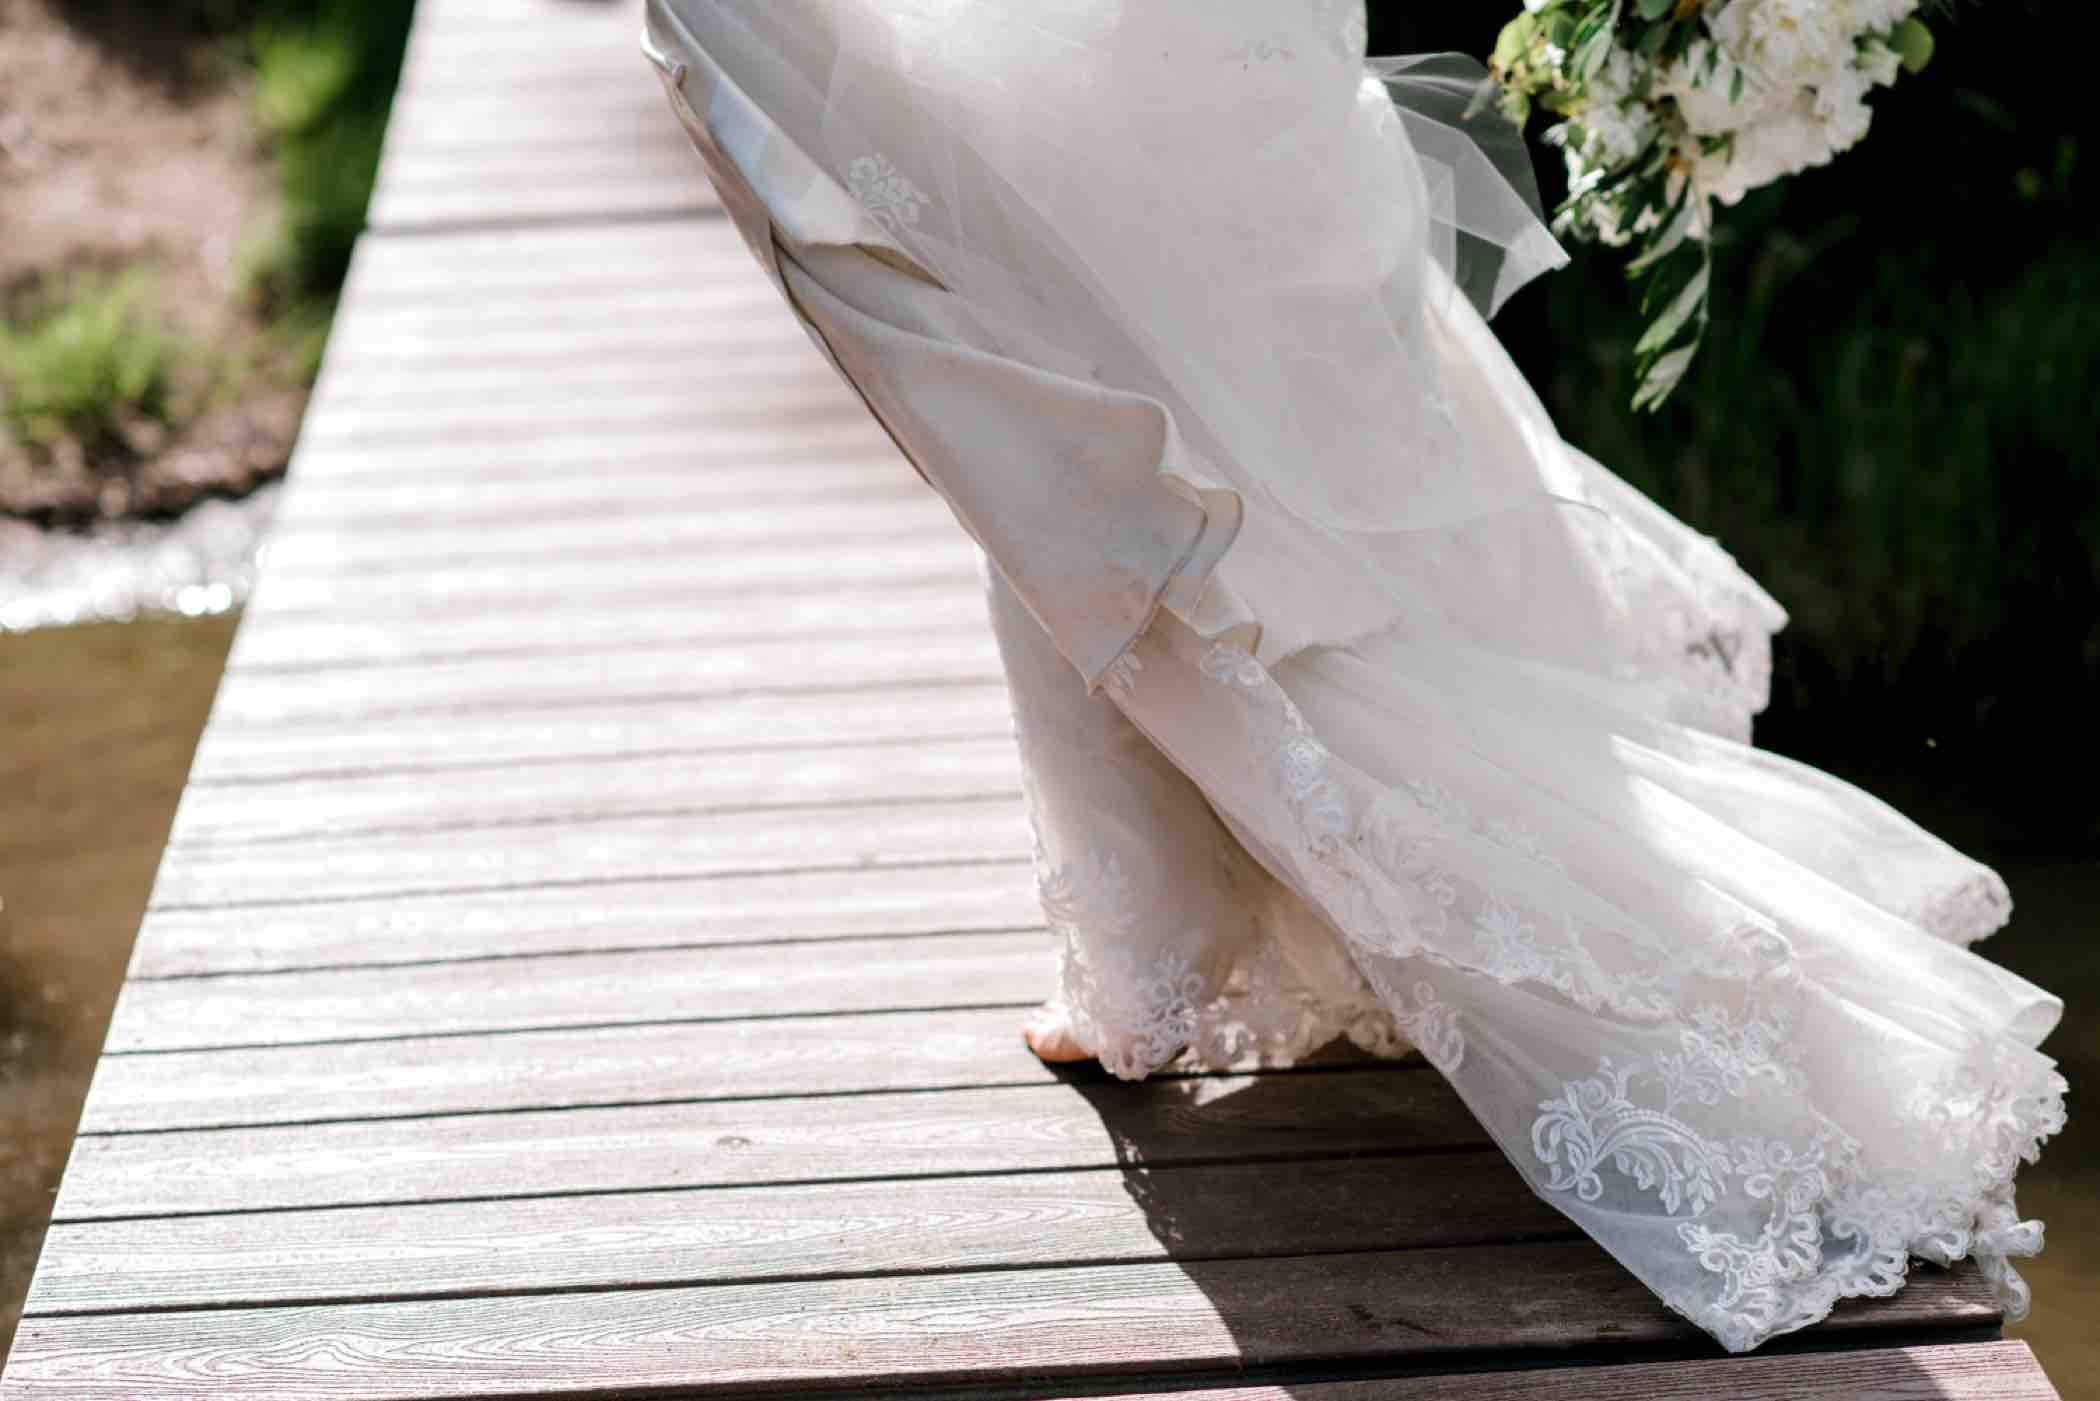 Bride's dress blows on the dock of the Piney Lake at Piney River Ranch in Vail, Colorado. Photo by Ali and Garrett, Romantic, Adventurous, Nostalgic Wedding Photographers.